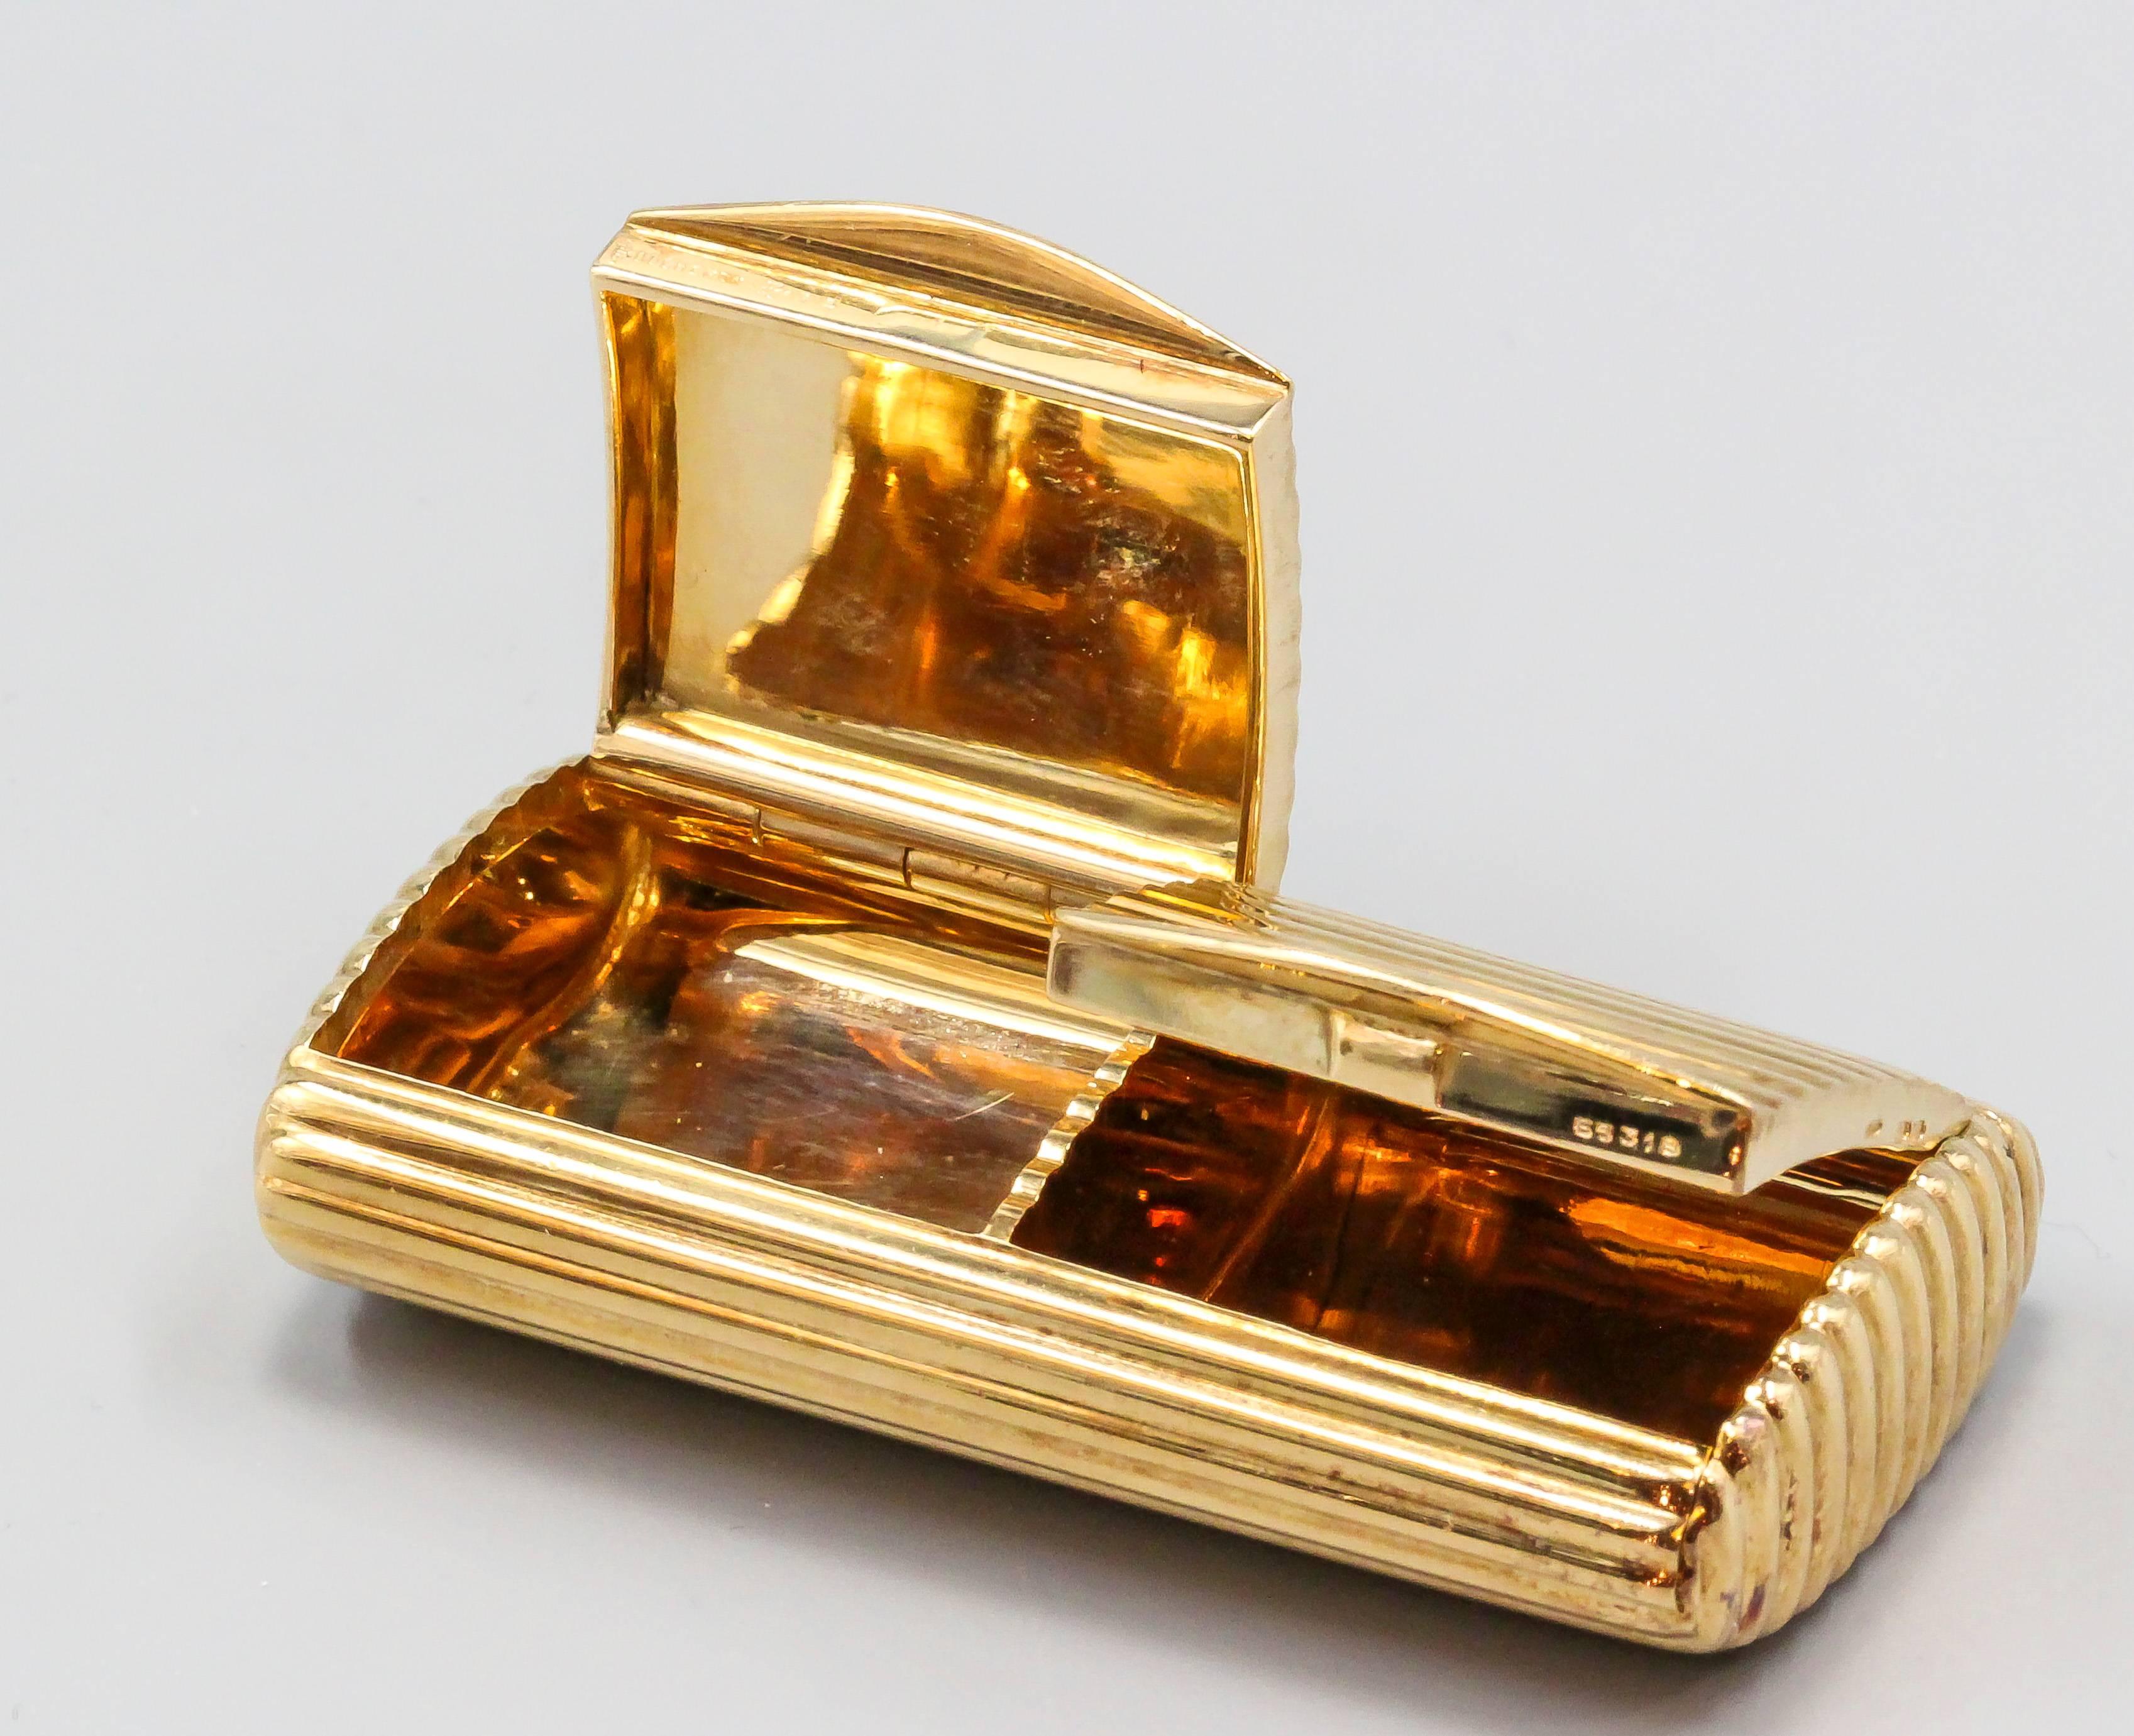 Refined 18K yellow gold ribbed double compartment pill box by Boucheron Paris, circa 1960s-70s. It features a beautifully made ribbed design with dual matching compartments. Great workmanship.

Hallmarks: Boucheron Paris, reference numbers, French